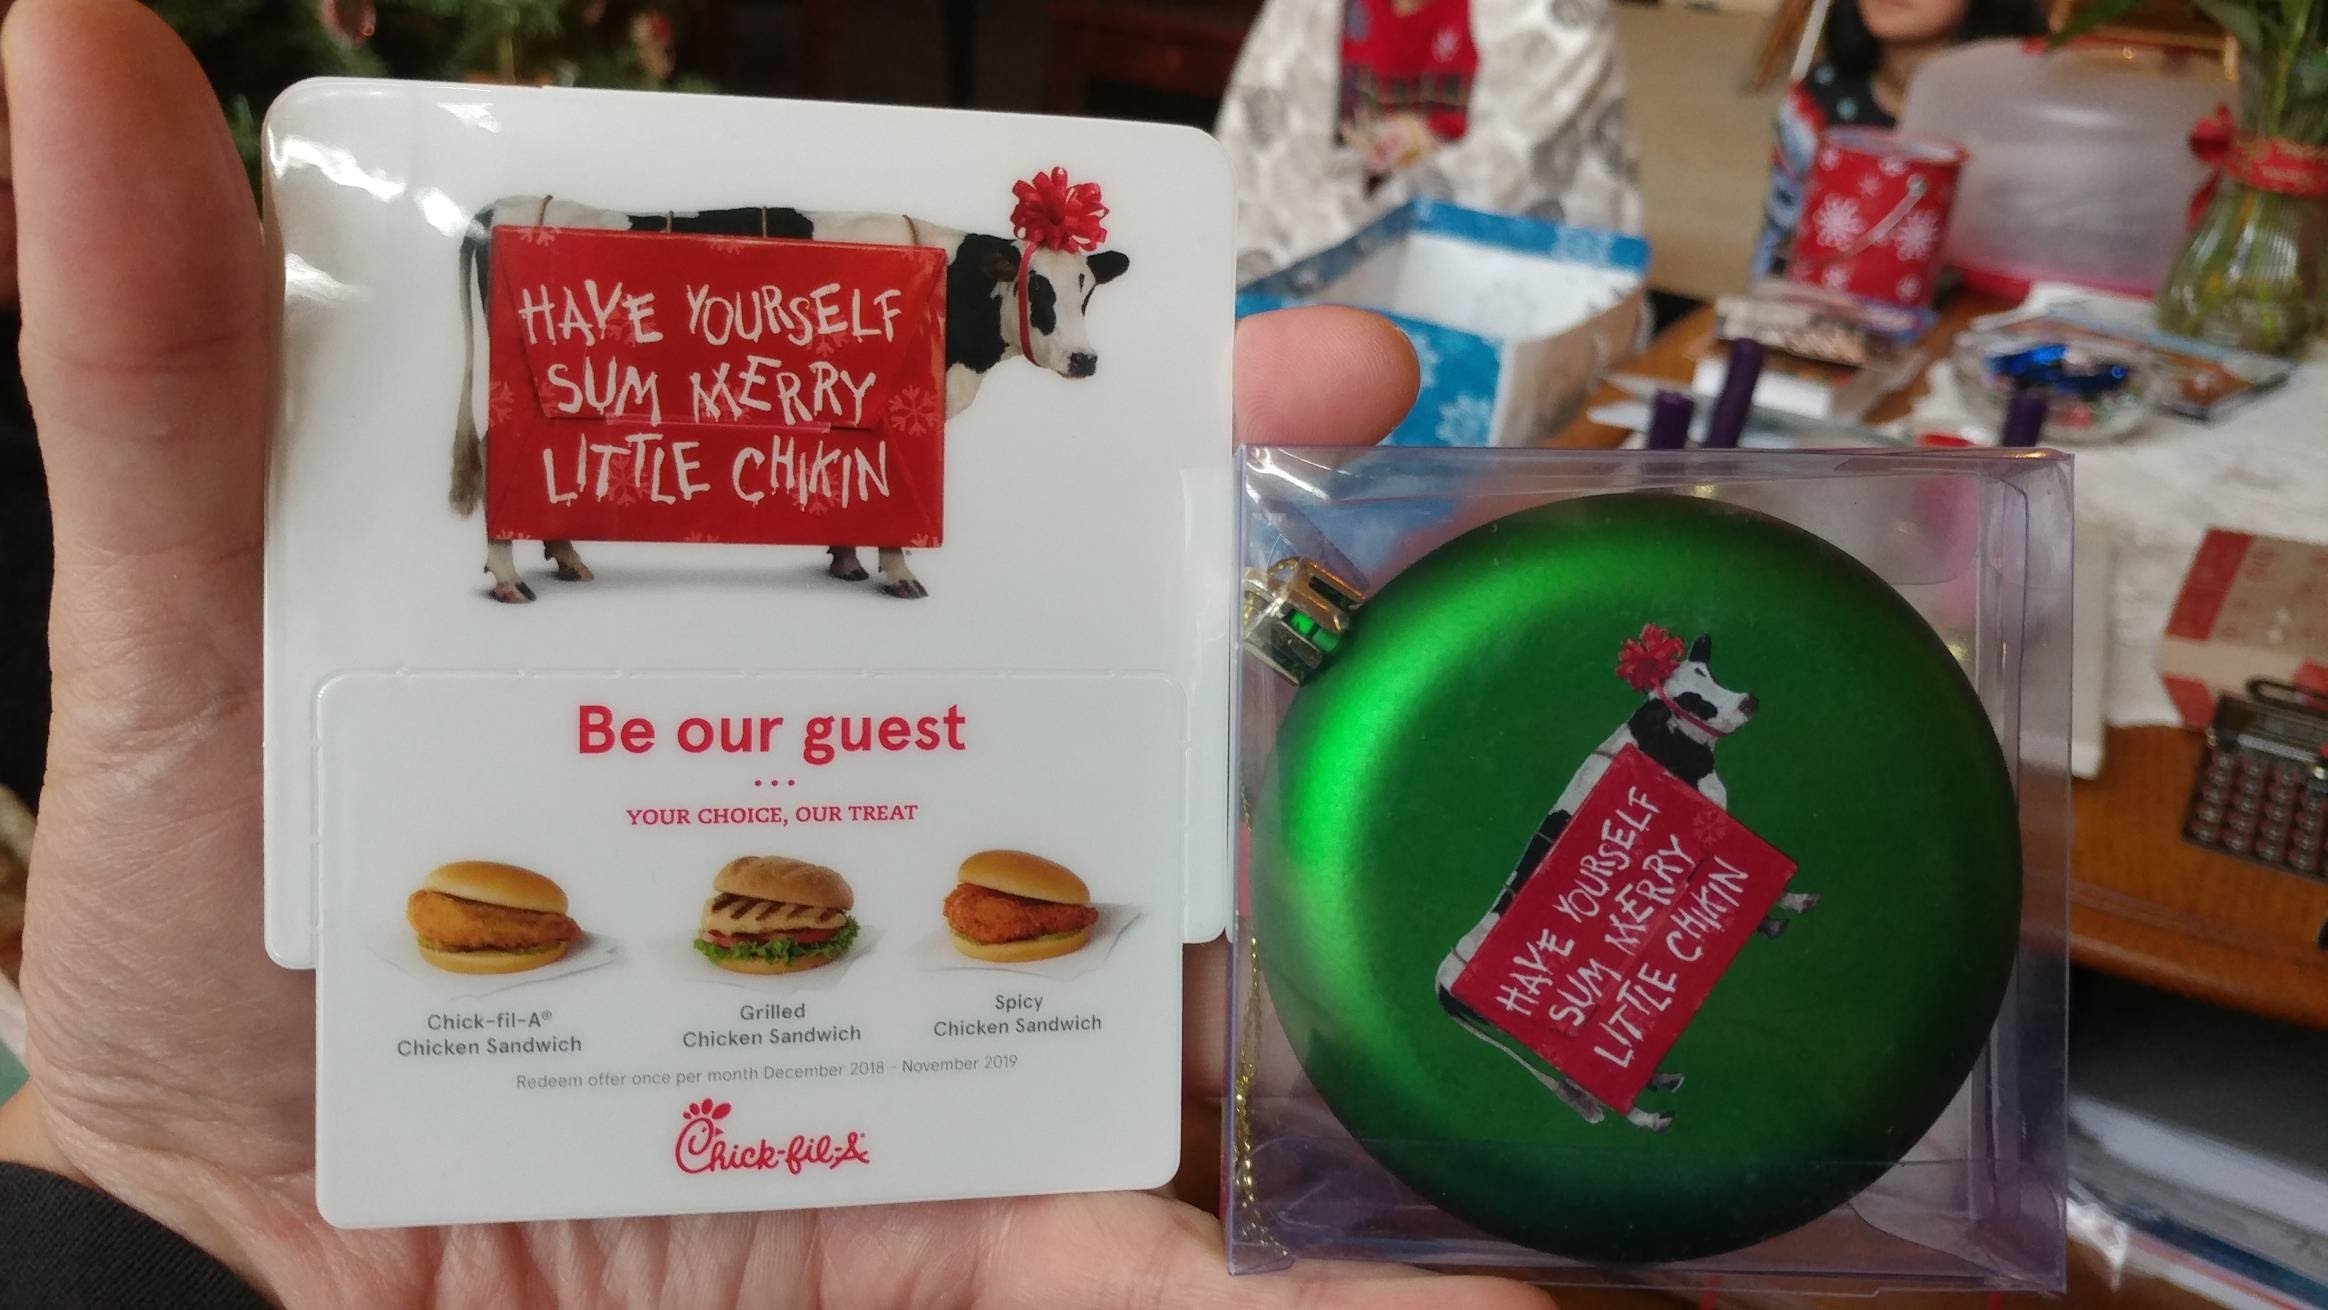 I Received This Chick-Fil-A Ornament And Gift Card For inside Chick Fil A Monthly Calendar 2020